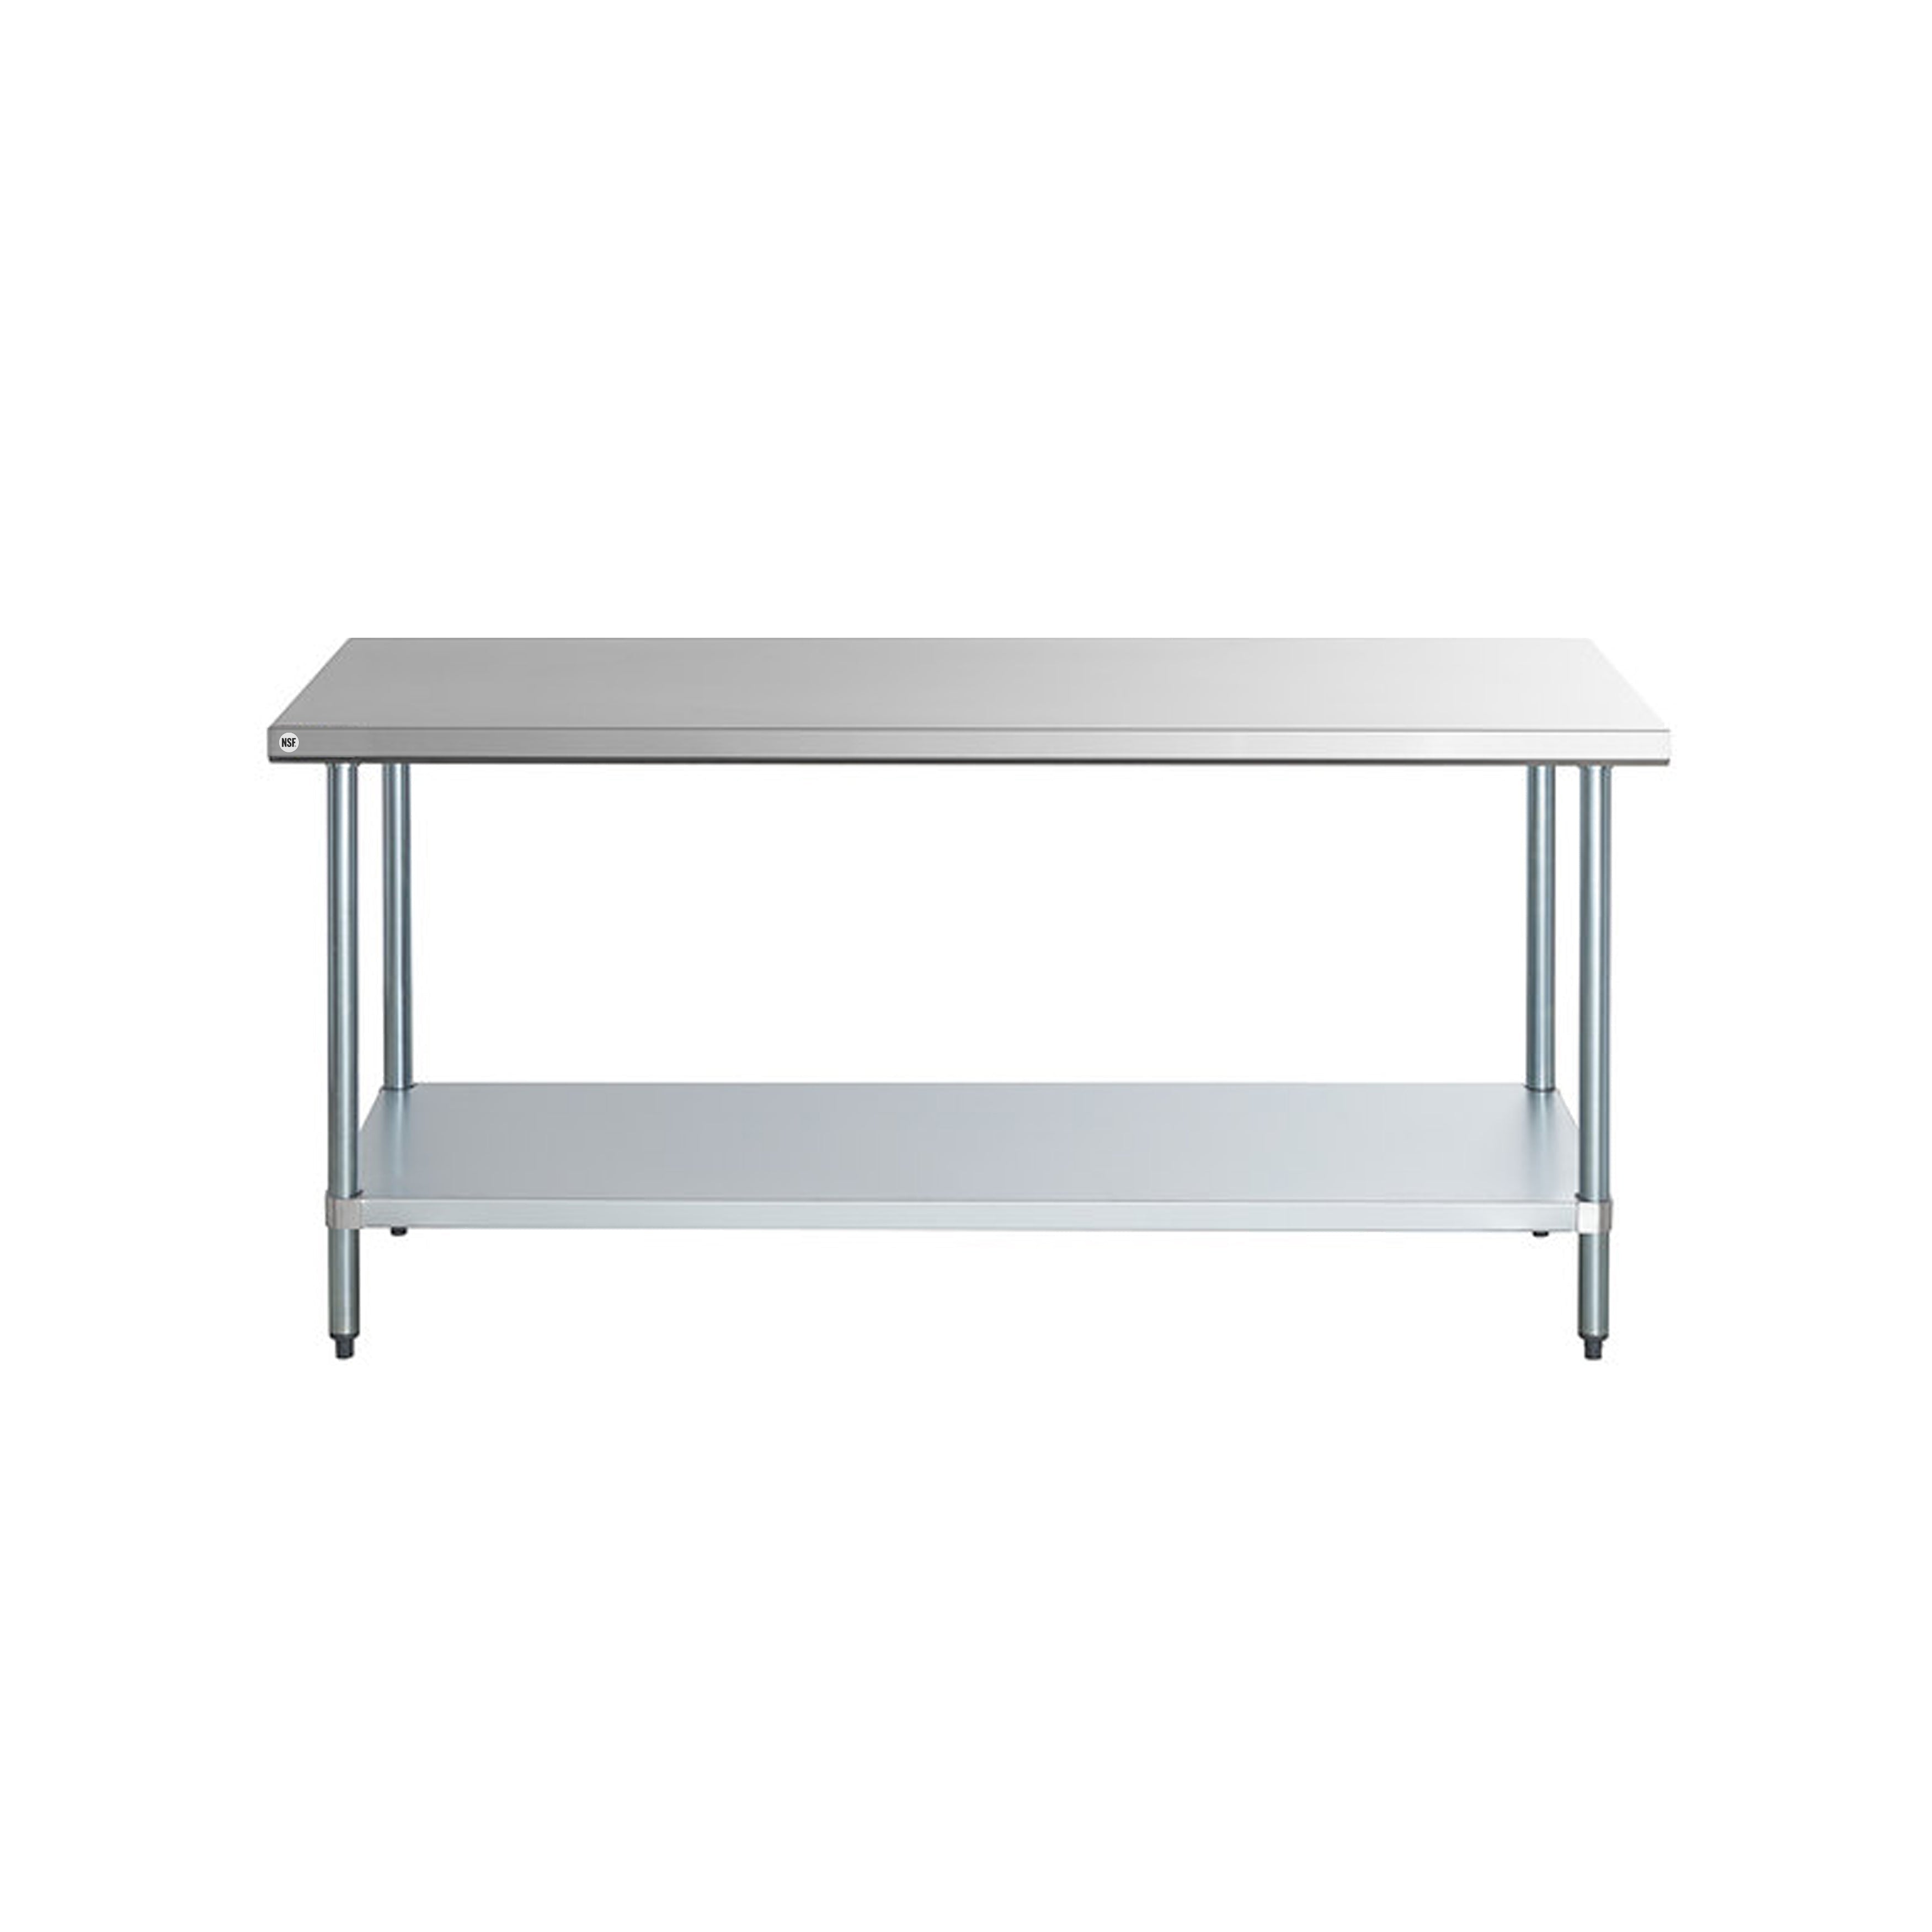 Omcan - 22077, Commercial 30" x 96" Stainless Steel Kitchen Work Table 17000lbs Light Duty